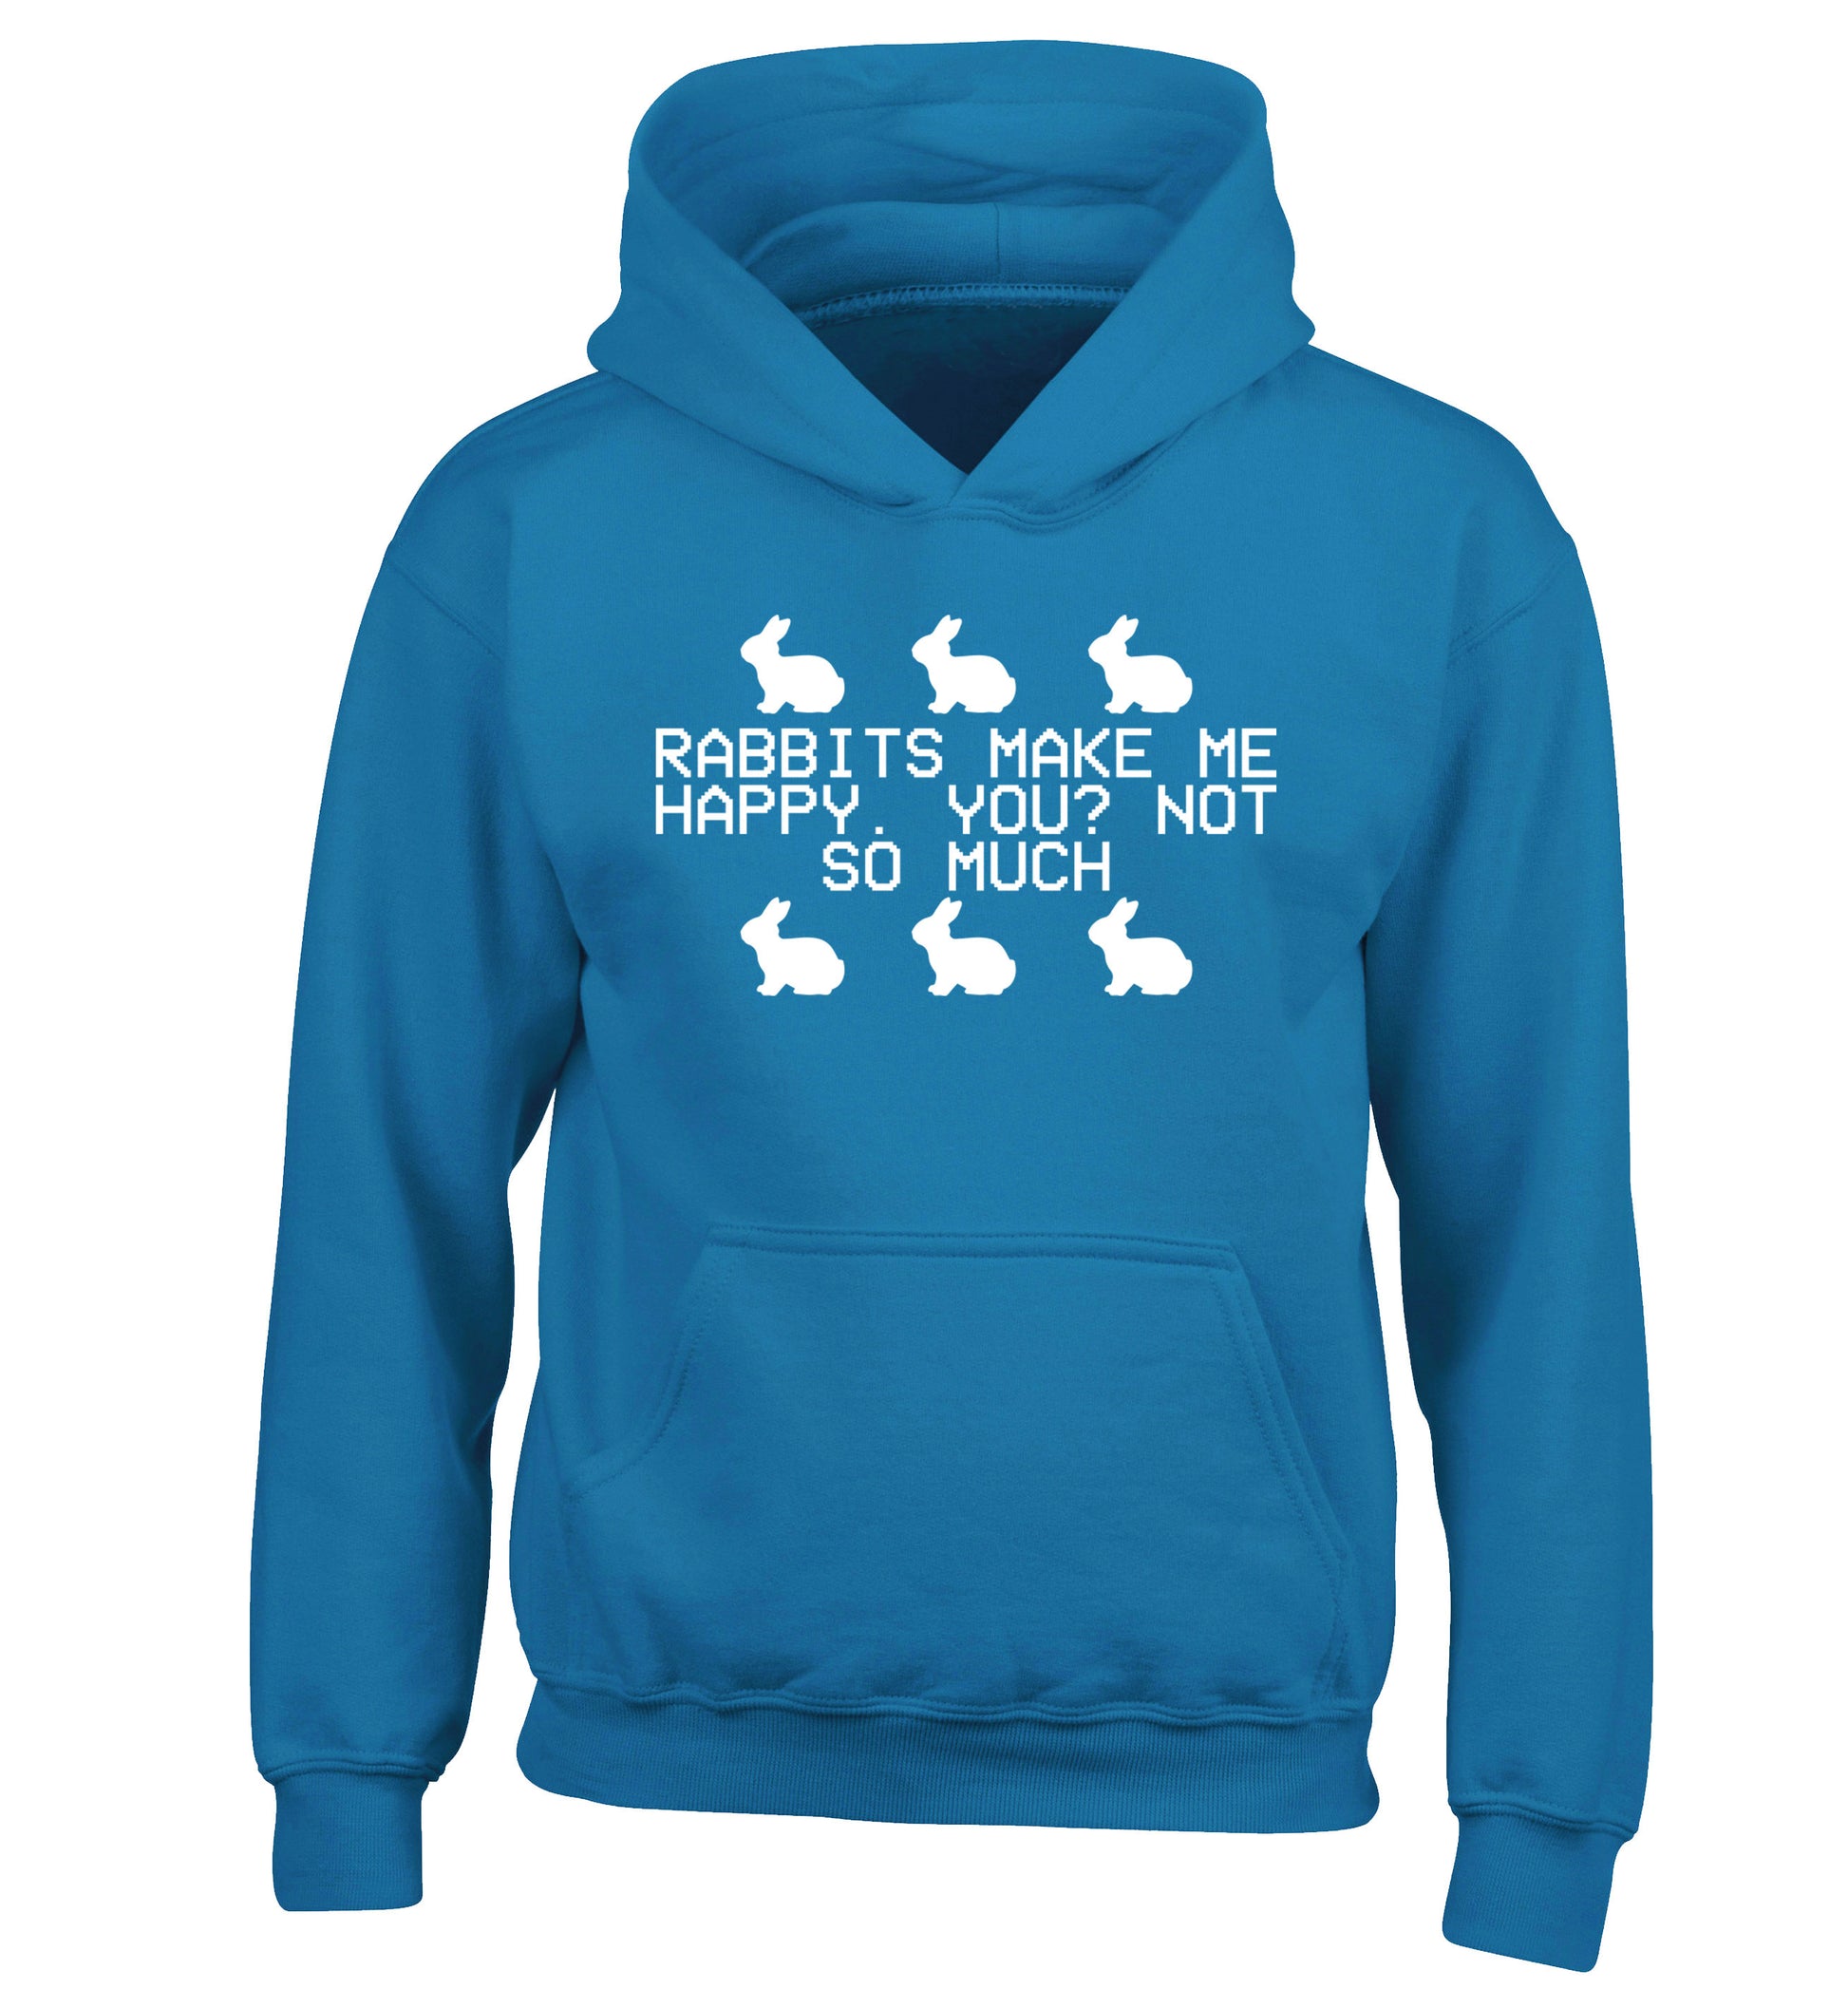 Rabbits make me happy, you not so much children's blue hoodie 12-14 Years